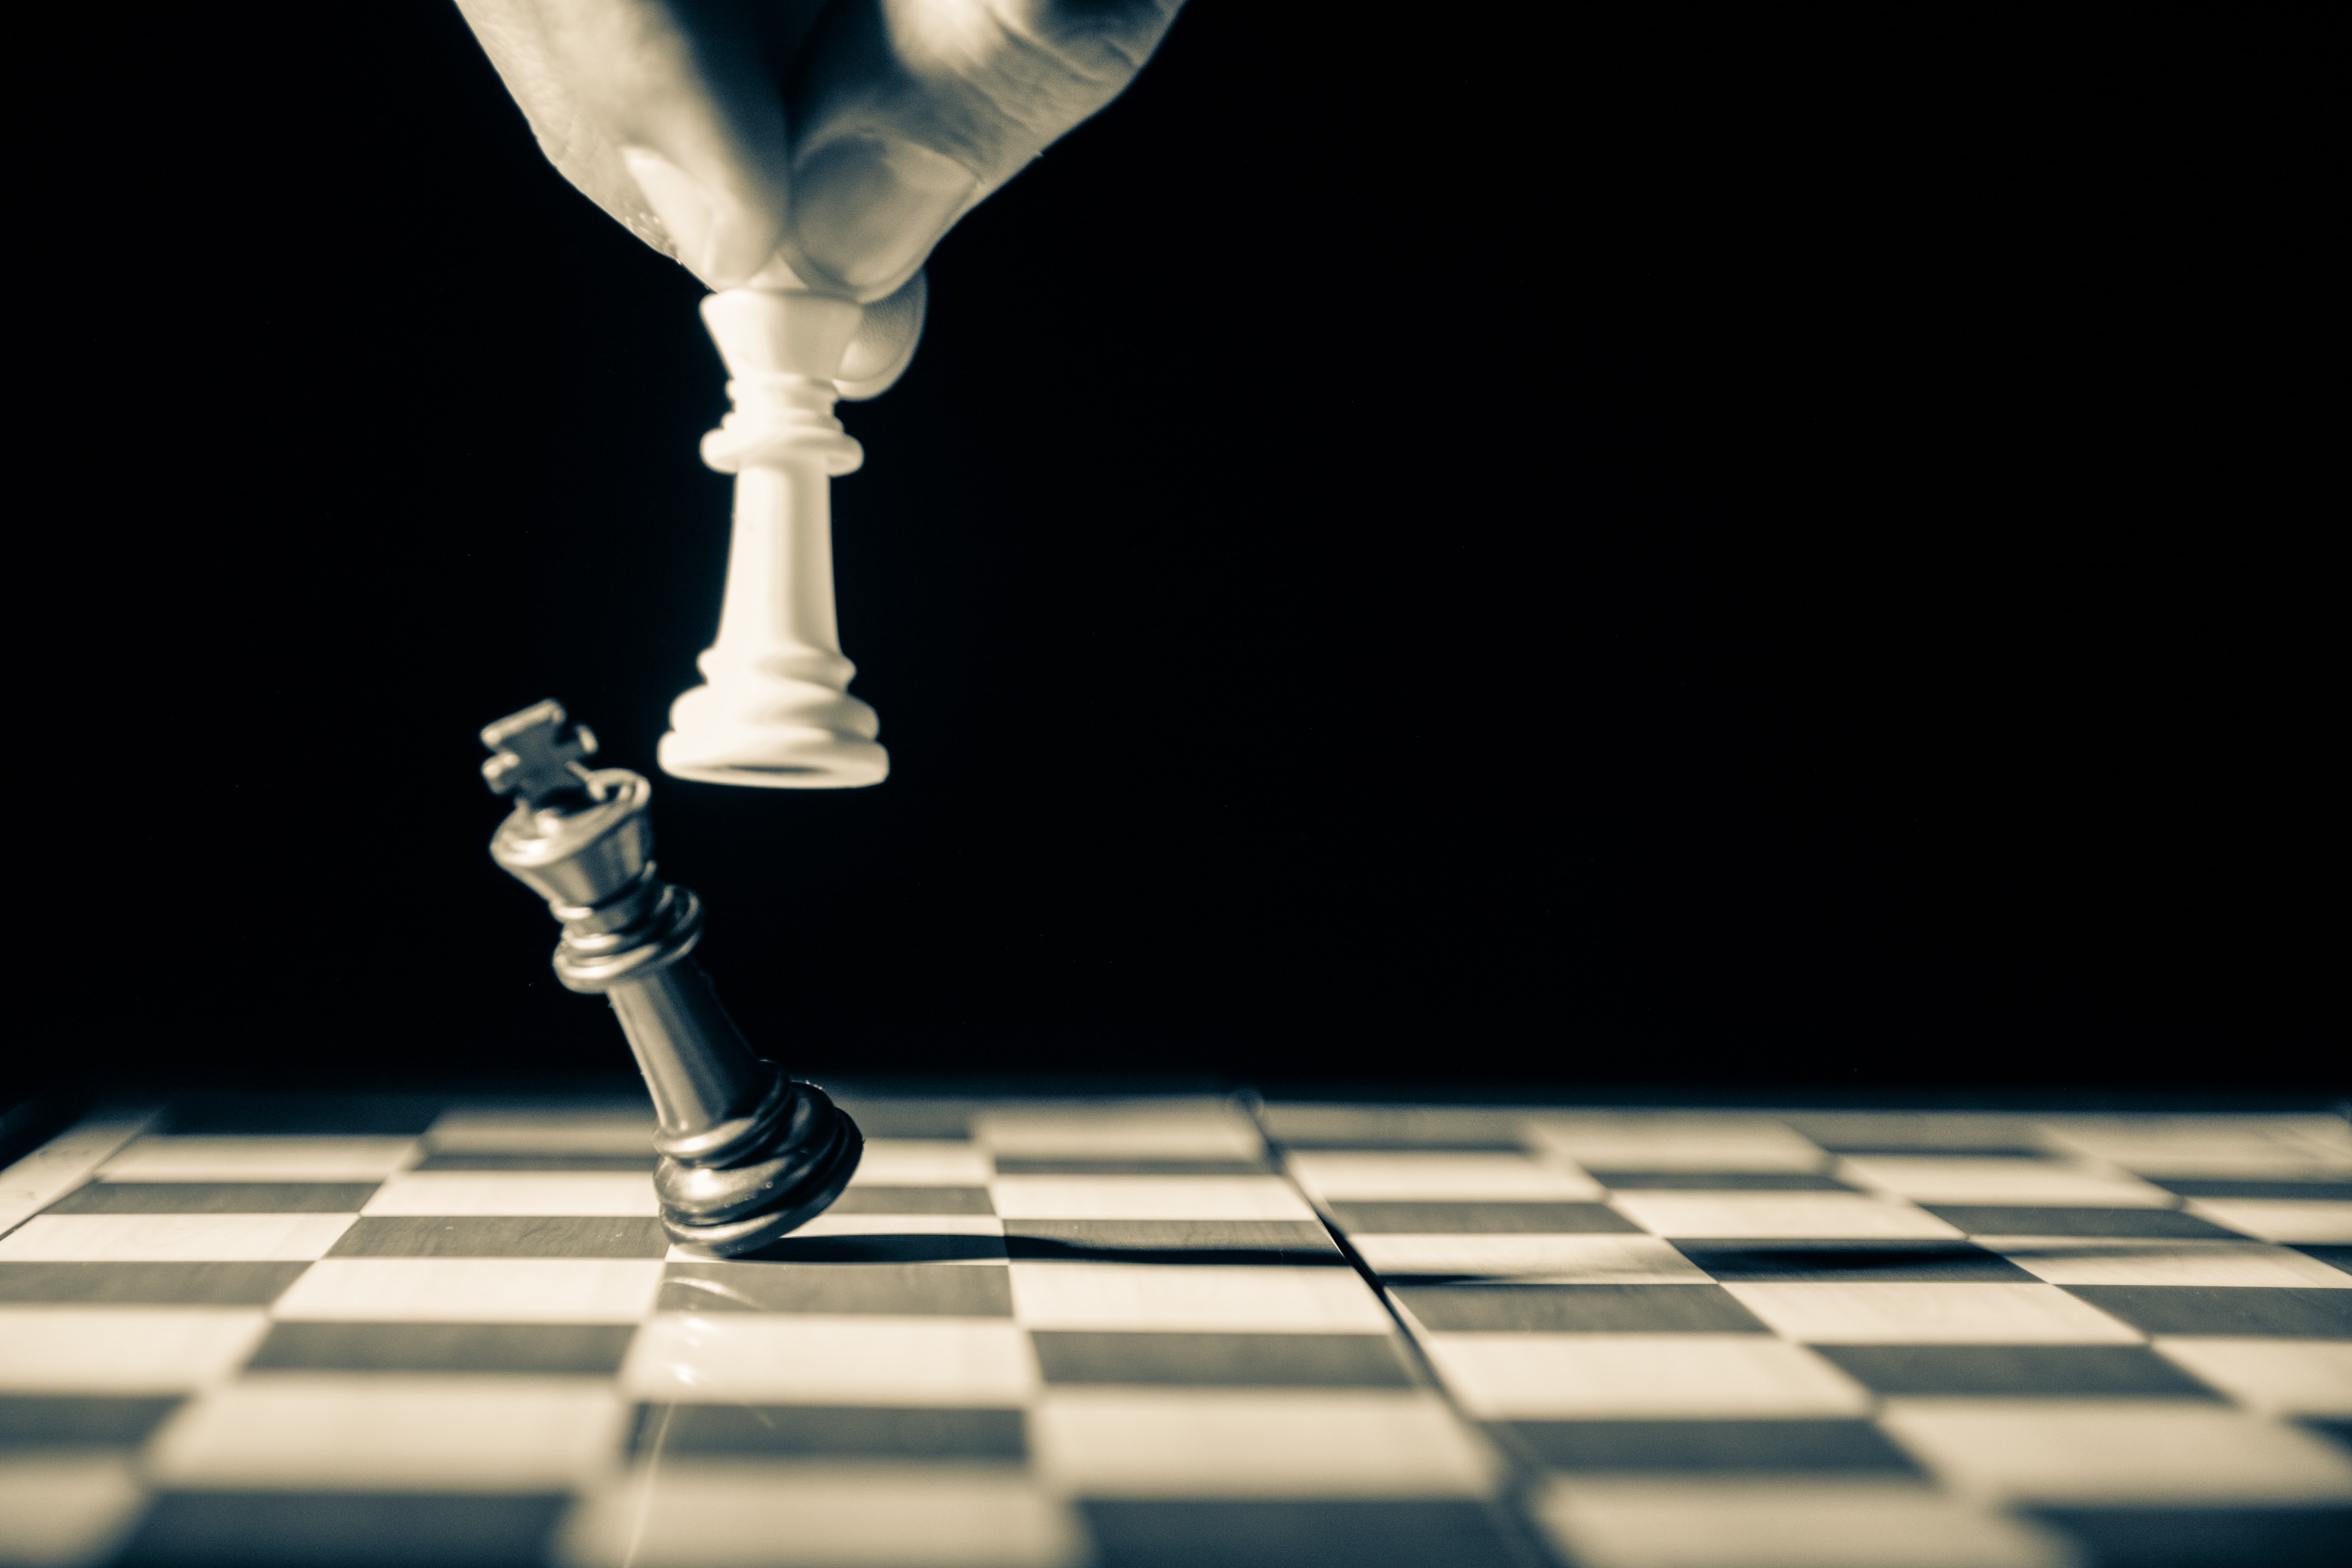 Stock image of a white chess piece knocking over a black chess piece.